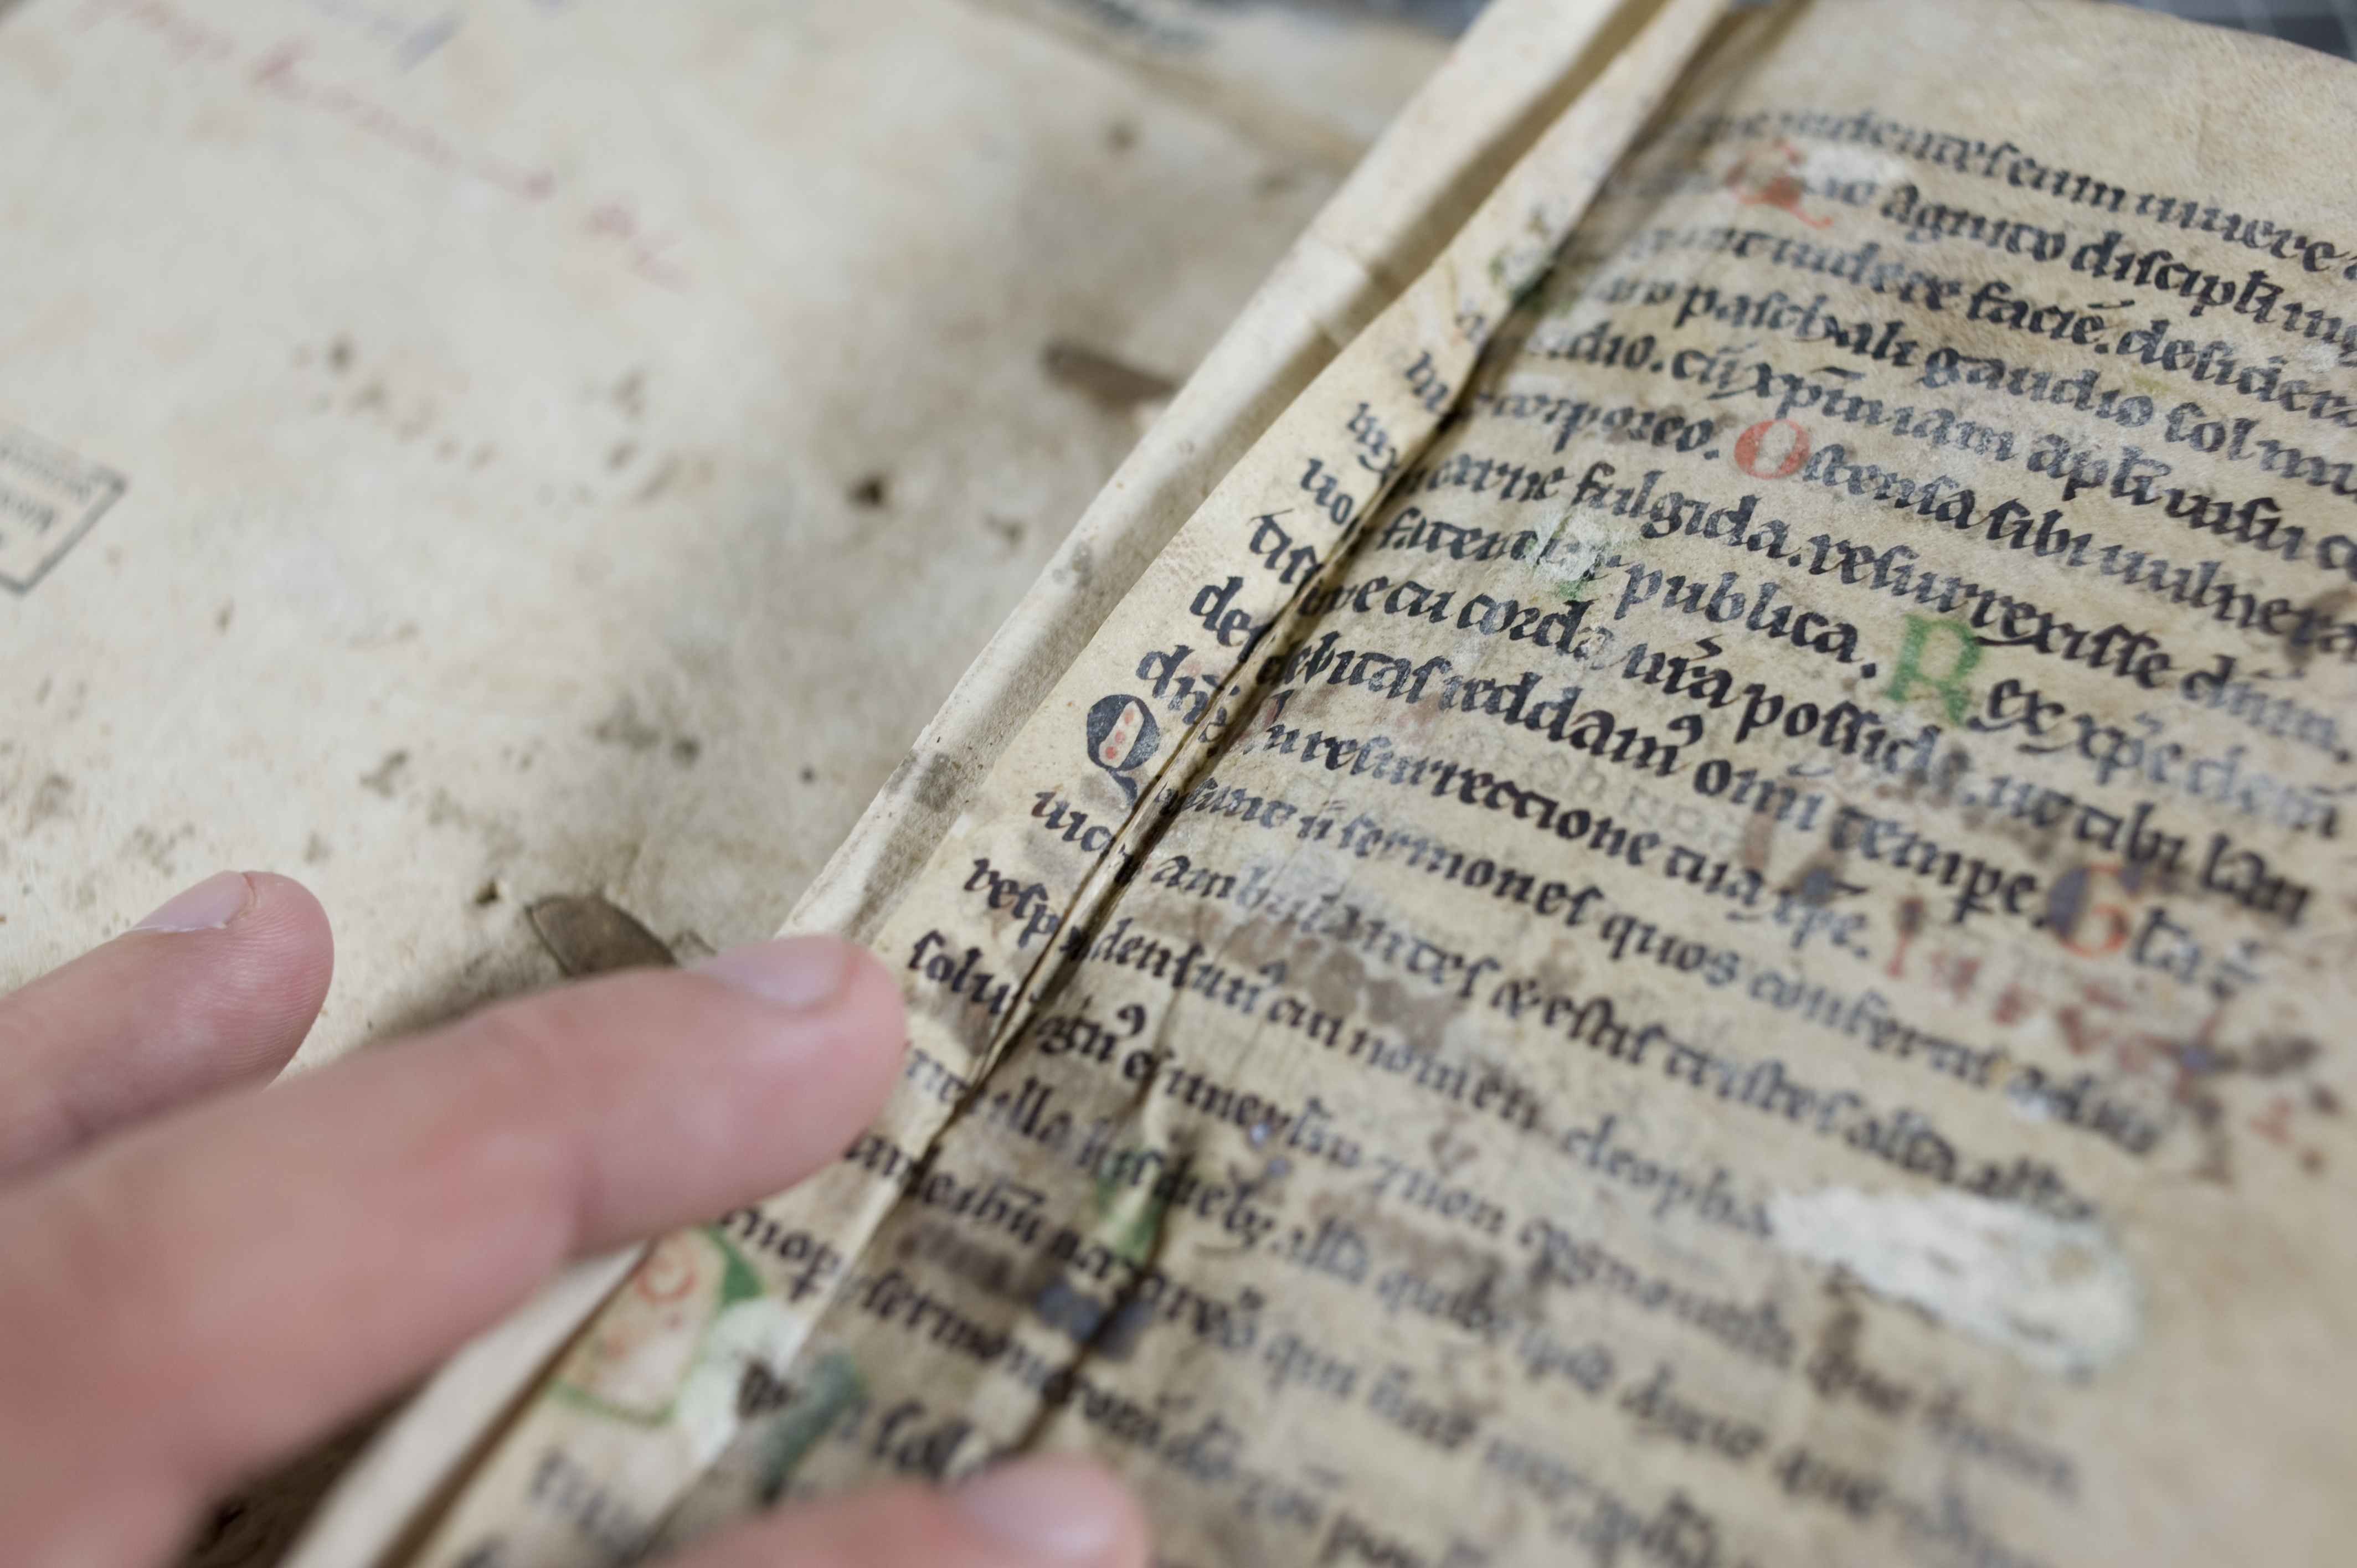 Two fragmentary leaves of a 12th century manuscript have been sewn into the front and back of TypFL.B47GS.